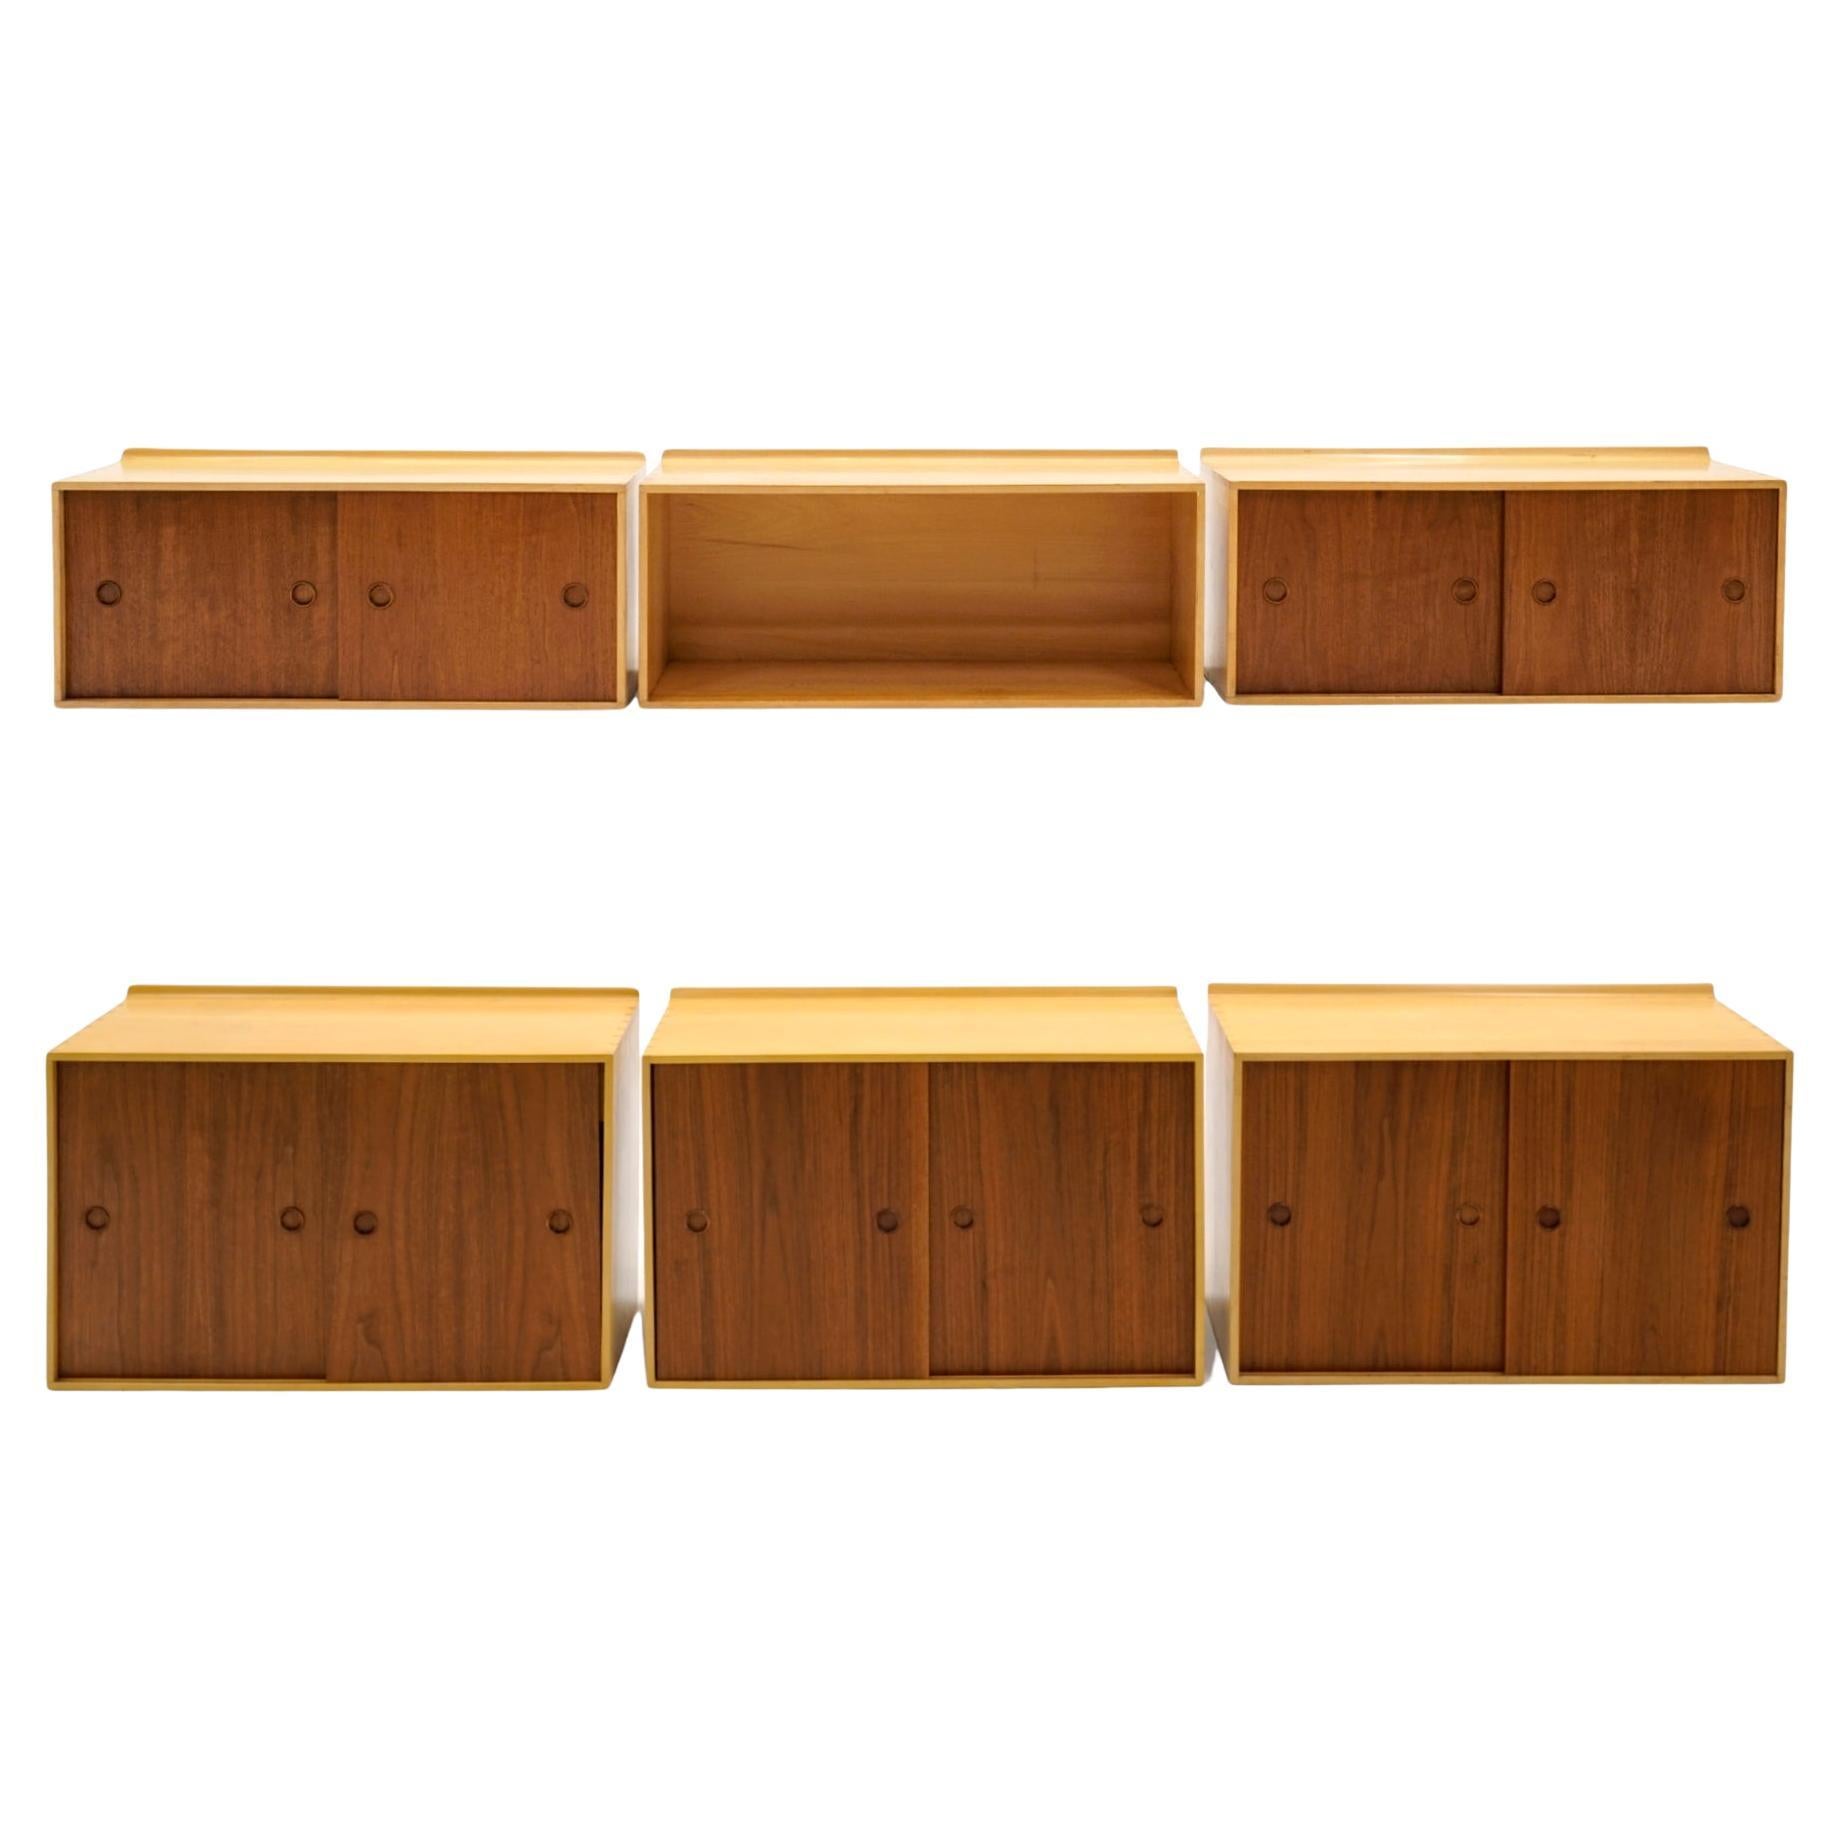 Wall Mounted Cabinets by Finn Juhl for Baker, Walnut and Birch, Great Condition